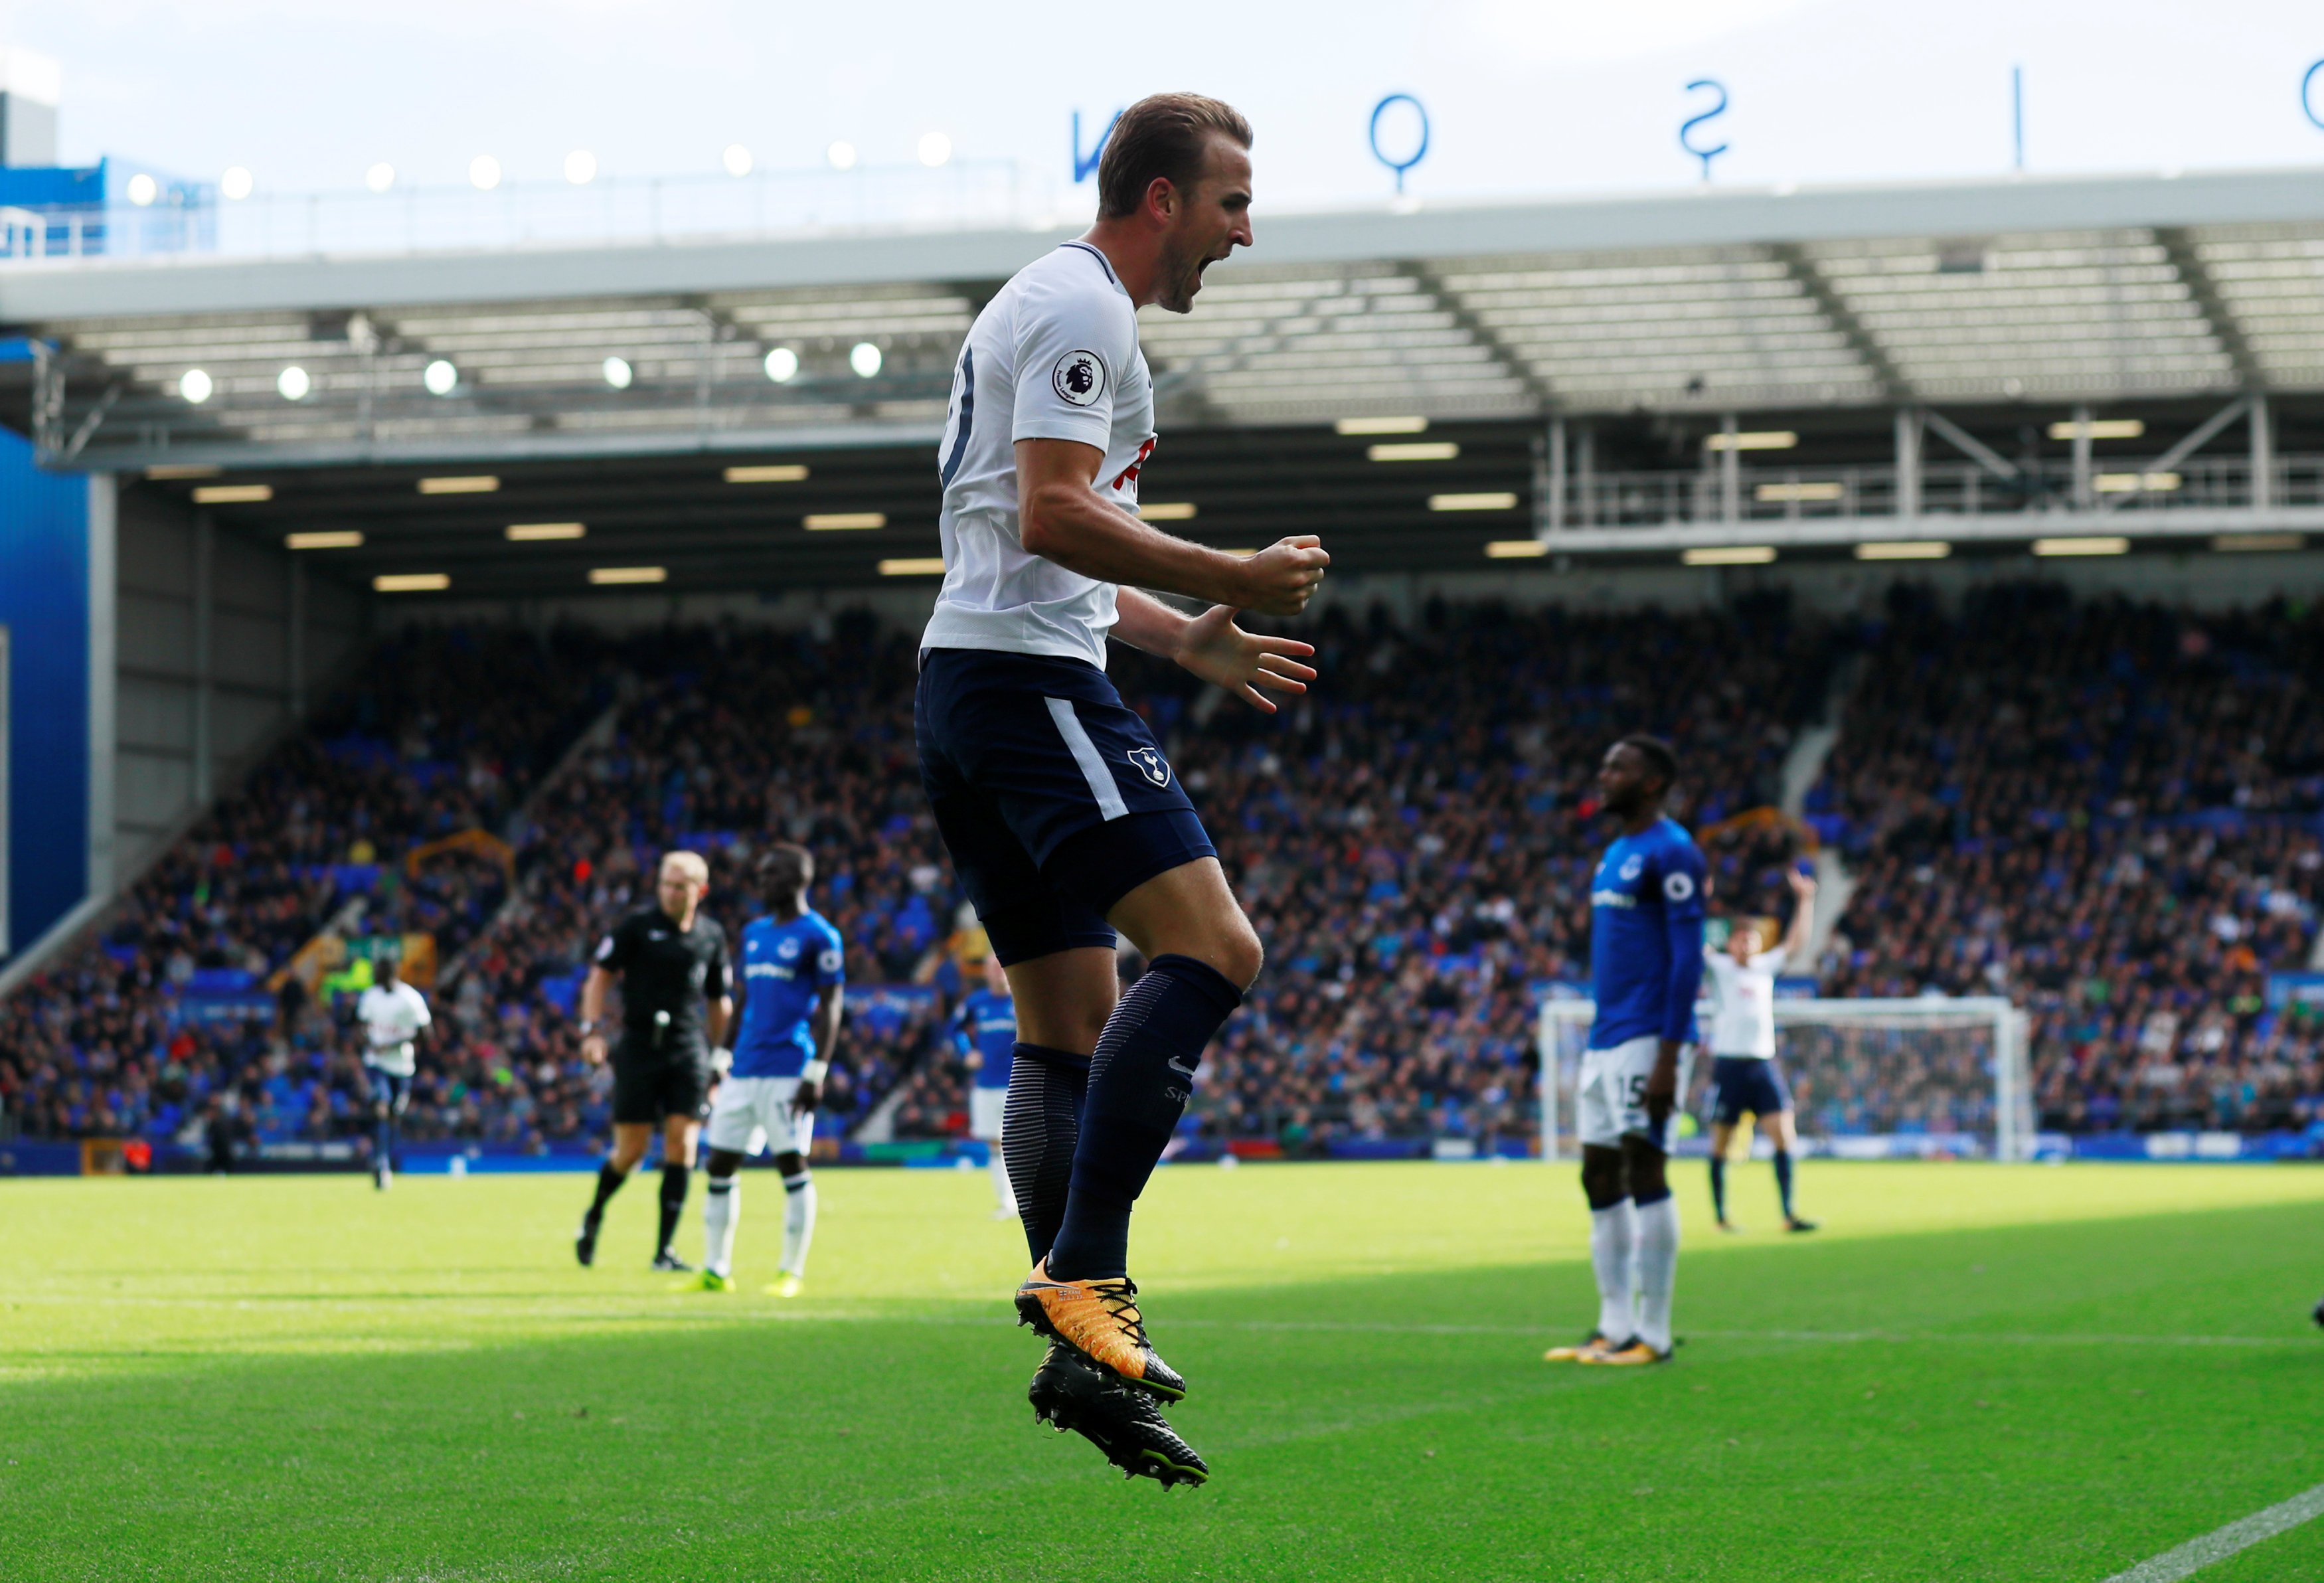 Football: Kane double leads Tottenham to victory at Everton